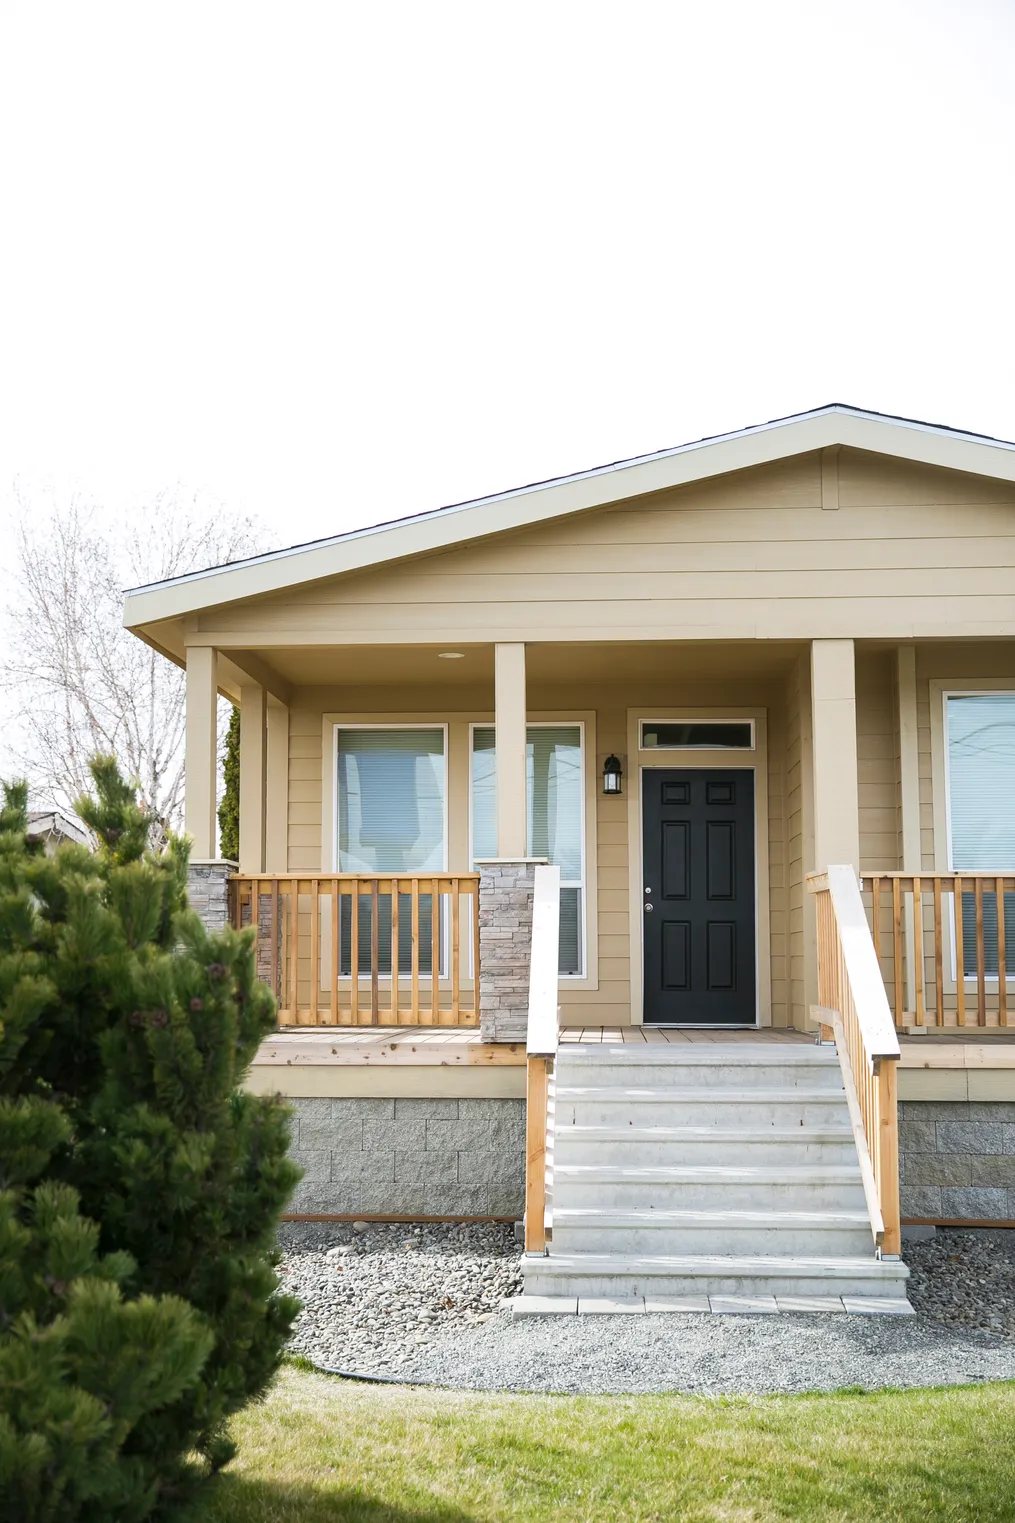 The THE SPRUCE Exterior. This Manufactured Mobile Home features 3 bedrooms and 2 baths.